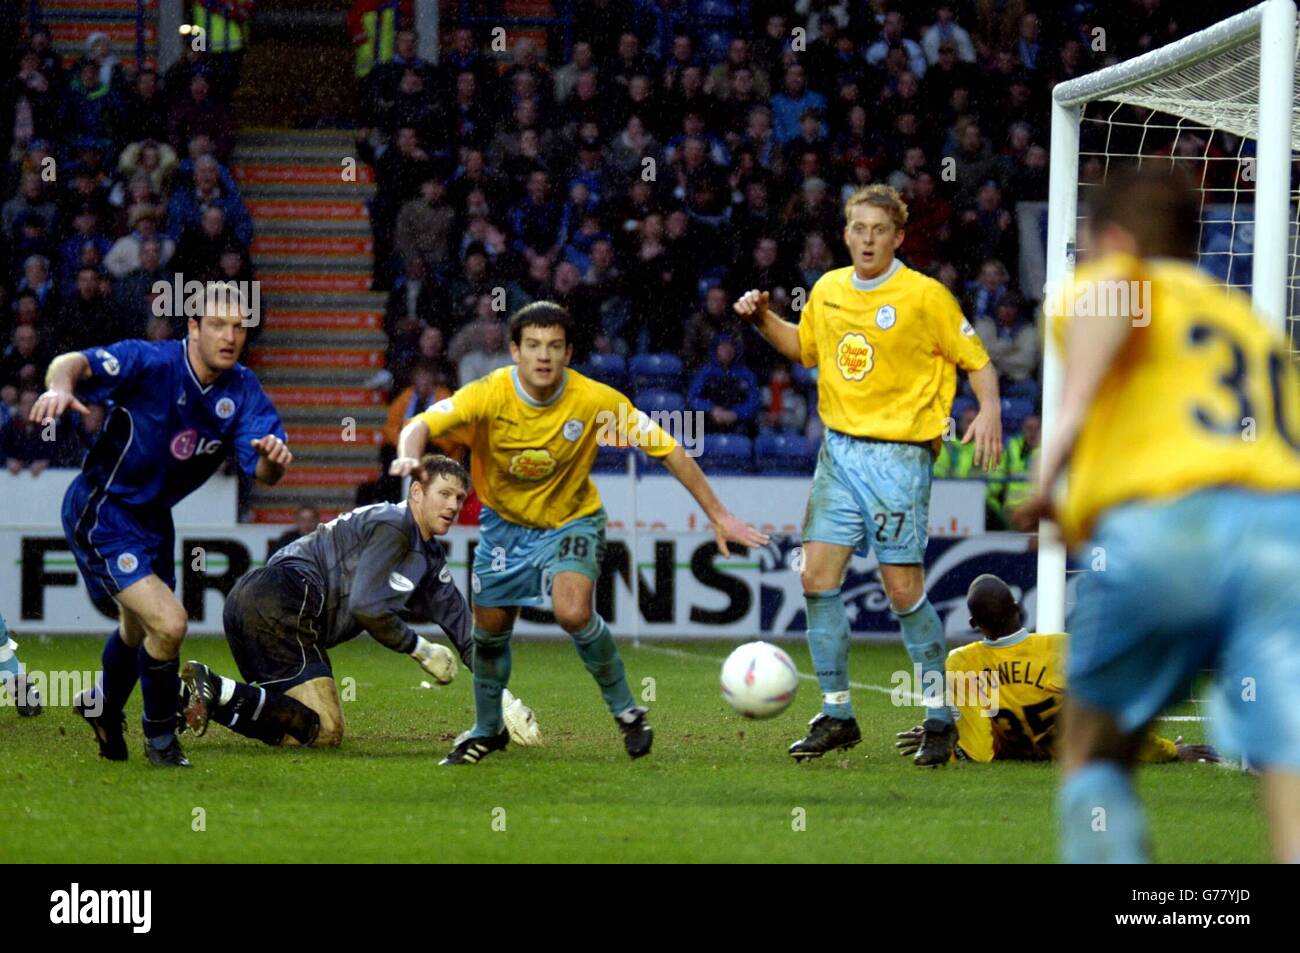 Leicester players make a failed attempt on the Sheffield Wednesday goal, during the Nationwide Division One match at The Walkers Stadium, Leicester. Final score: Leicester City 1, Sheffield Wednesday 1. NO UNOFFICIAL CLUB WEBSITE USE. Stock Photo